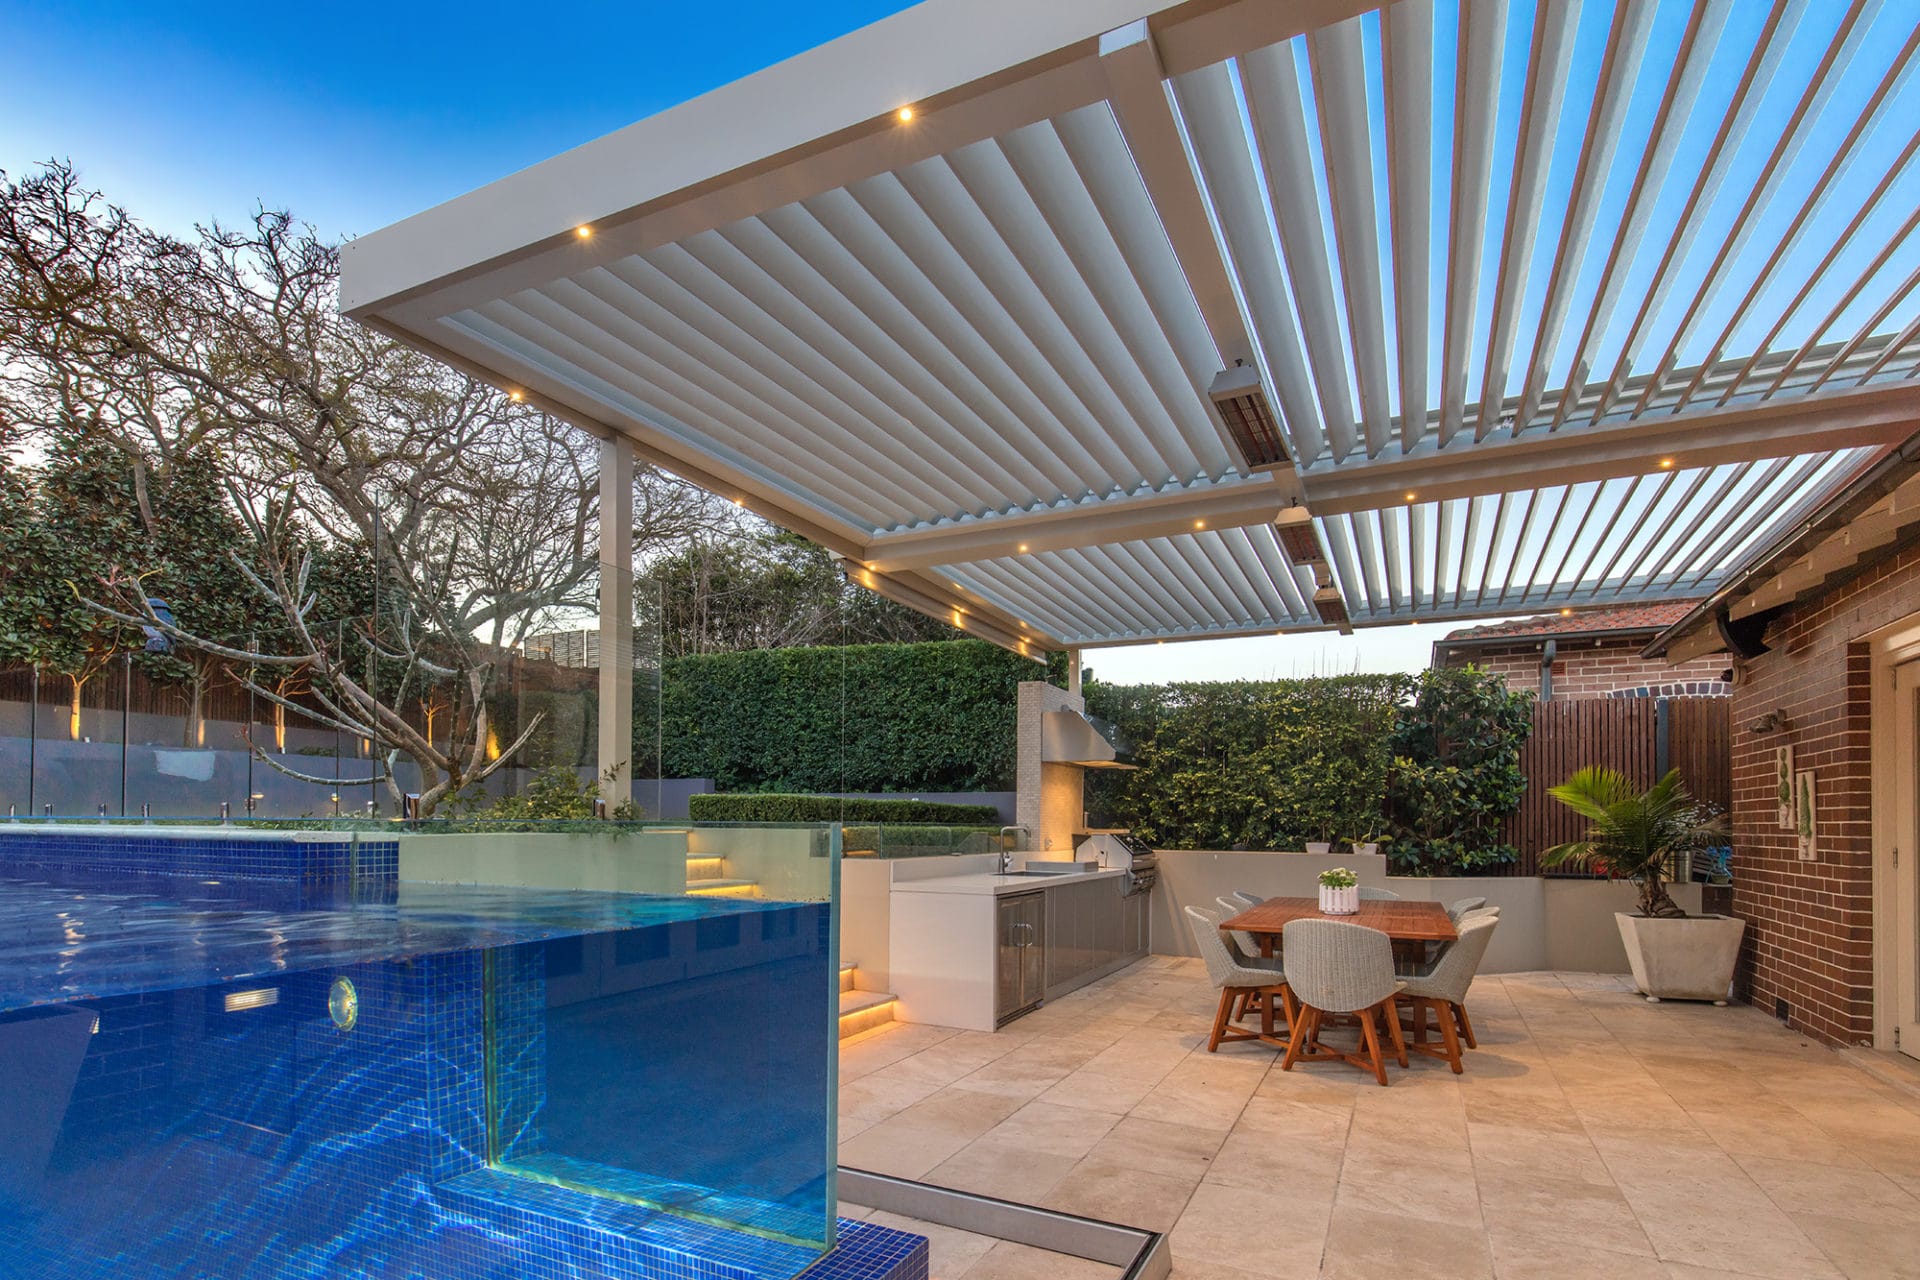 Haberfield backyard with luxury poolside pergola and fully equipped entertaining area.